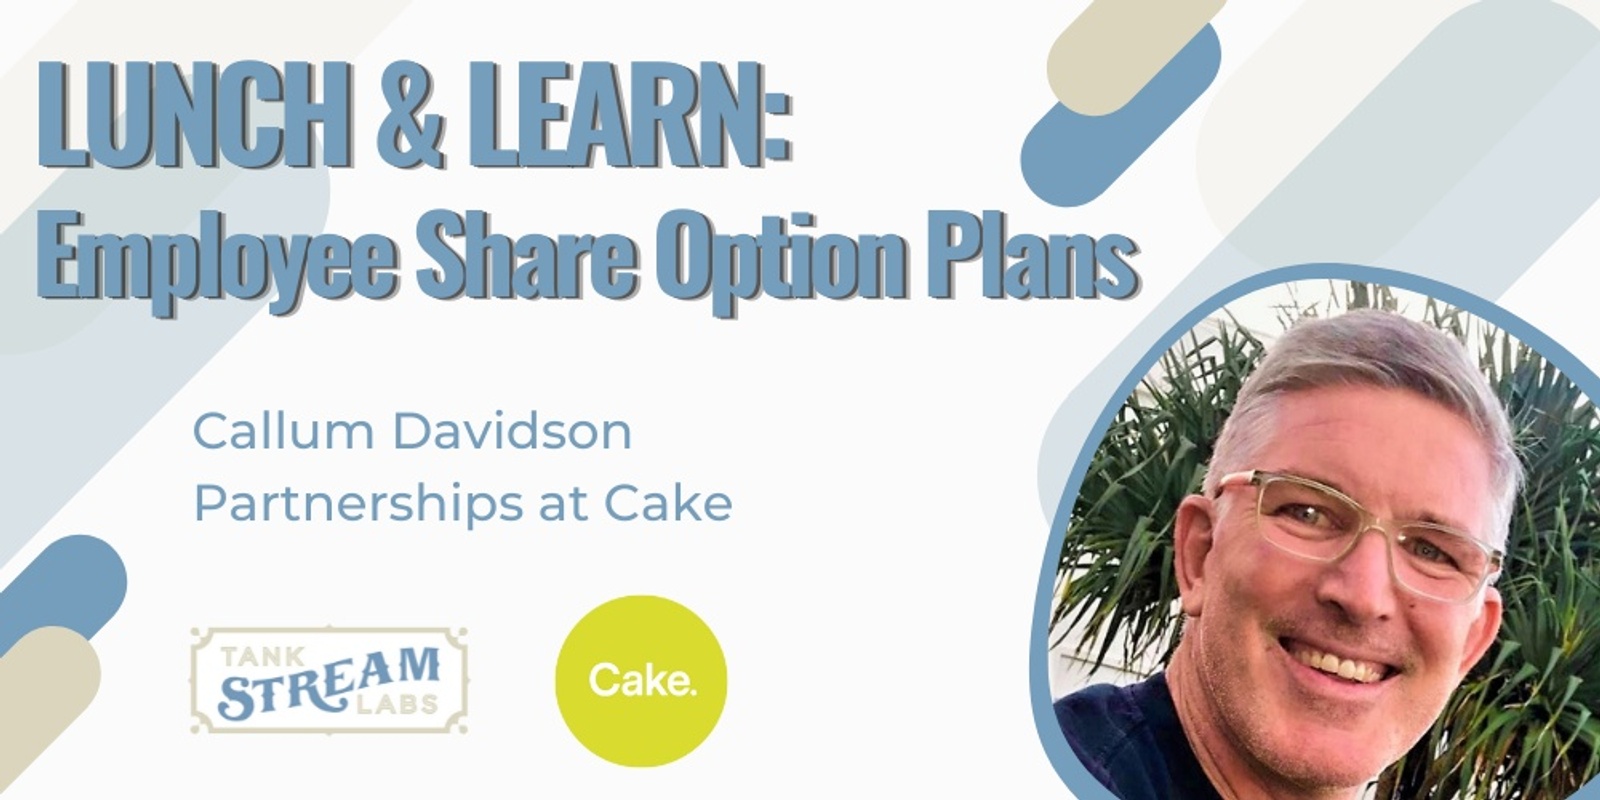 Banner image for Lunch & Learn: Employee Share Options Plans with Callum Davidson, Partnerships at Cake  